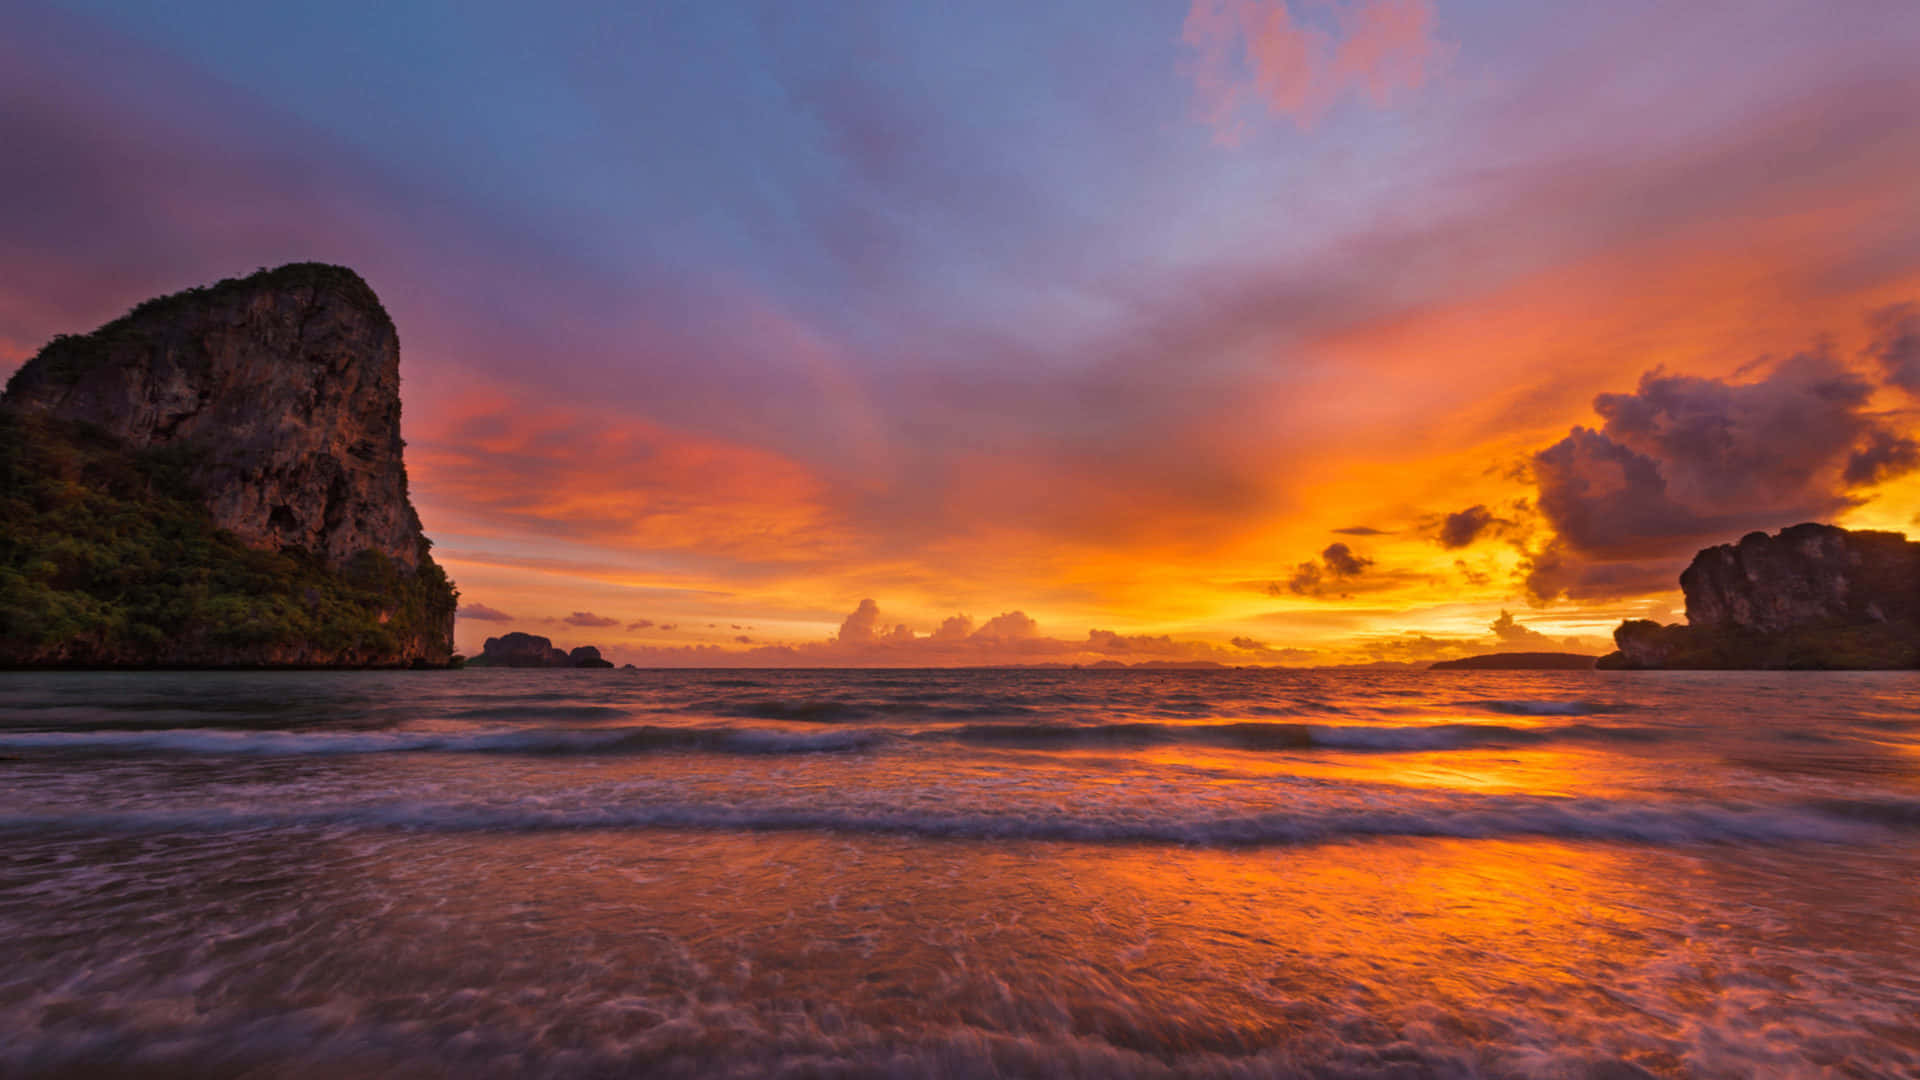 "Capture the Beauty of a Seaside Sunset" Wallpaper